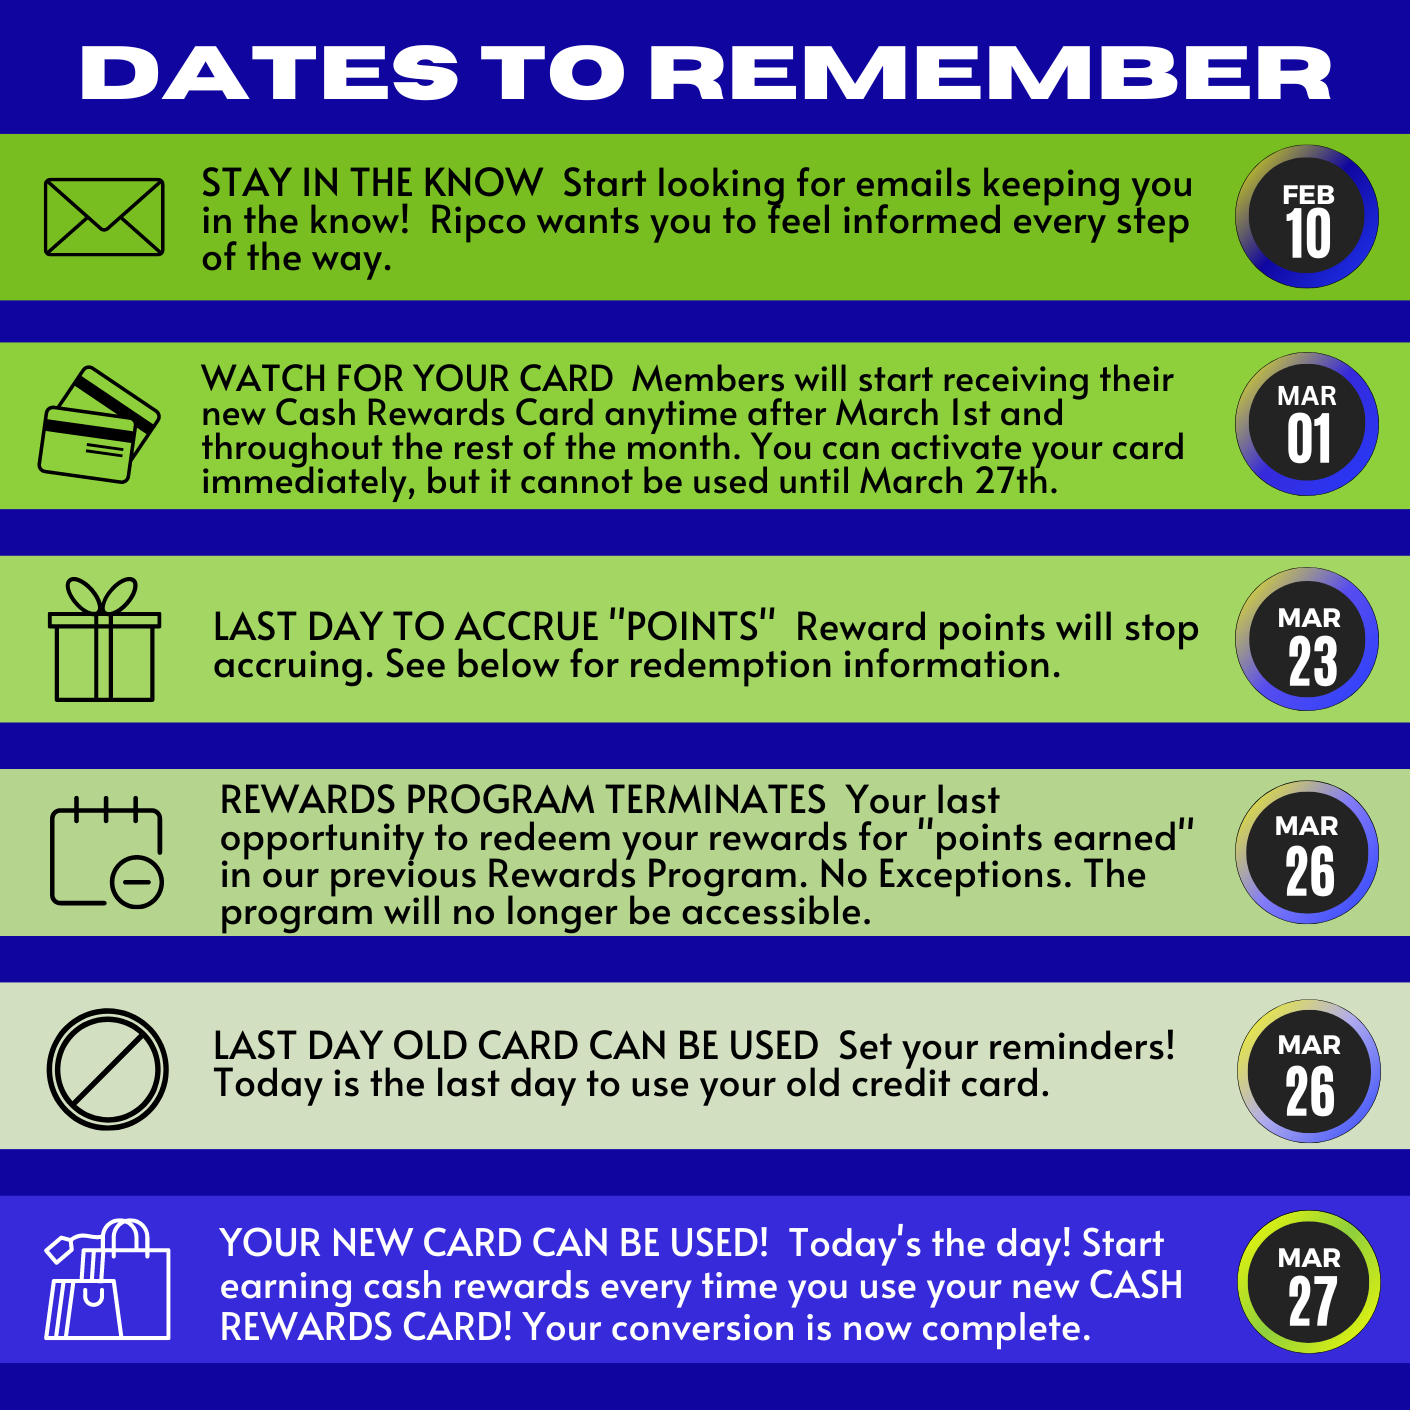 Conversion Dates To Remember. Start looking for emails keeping you informed Feb 1. Watch for your new card after Mar 1st. You can activate your card, but it cannot be used until Mar 27th. The last day to accrue reward points is Mar 23rd. Reward program terminates on Mar 26th. The program will no longer be accessible. Last day to use old card is Mar 26th. Your new card can be used Mar 27th. Your conversion is now complete.